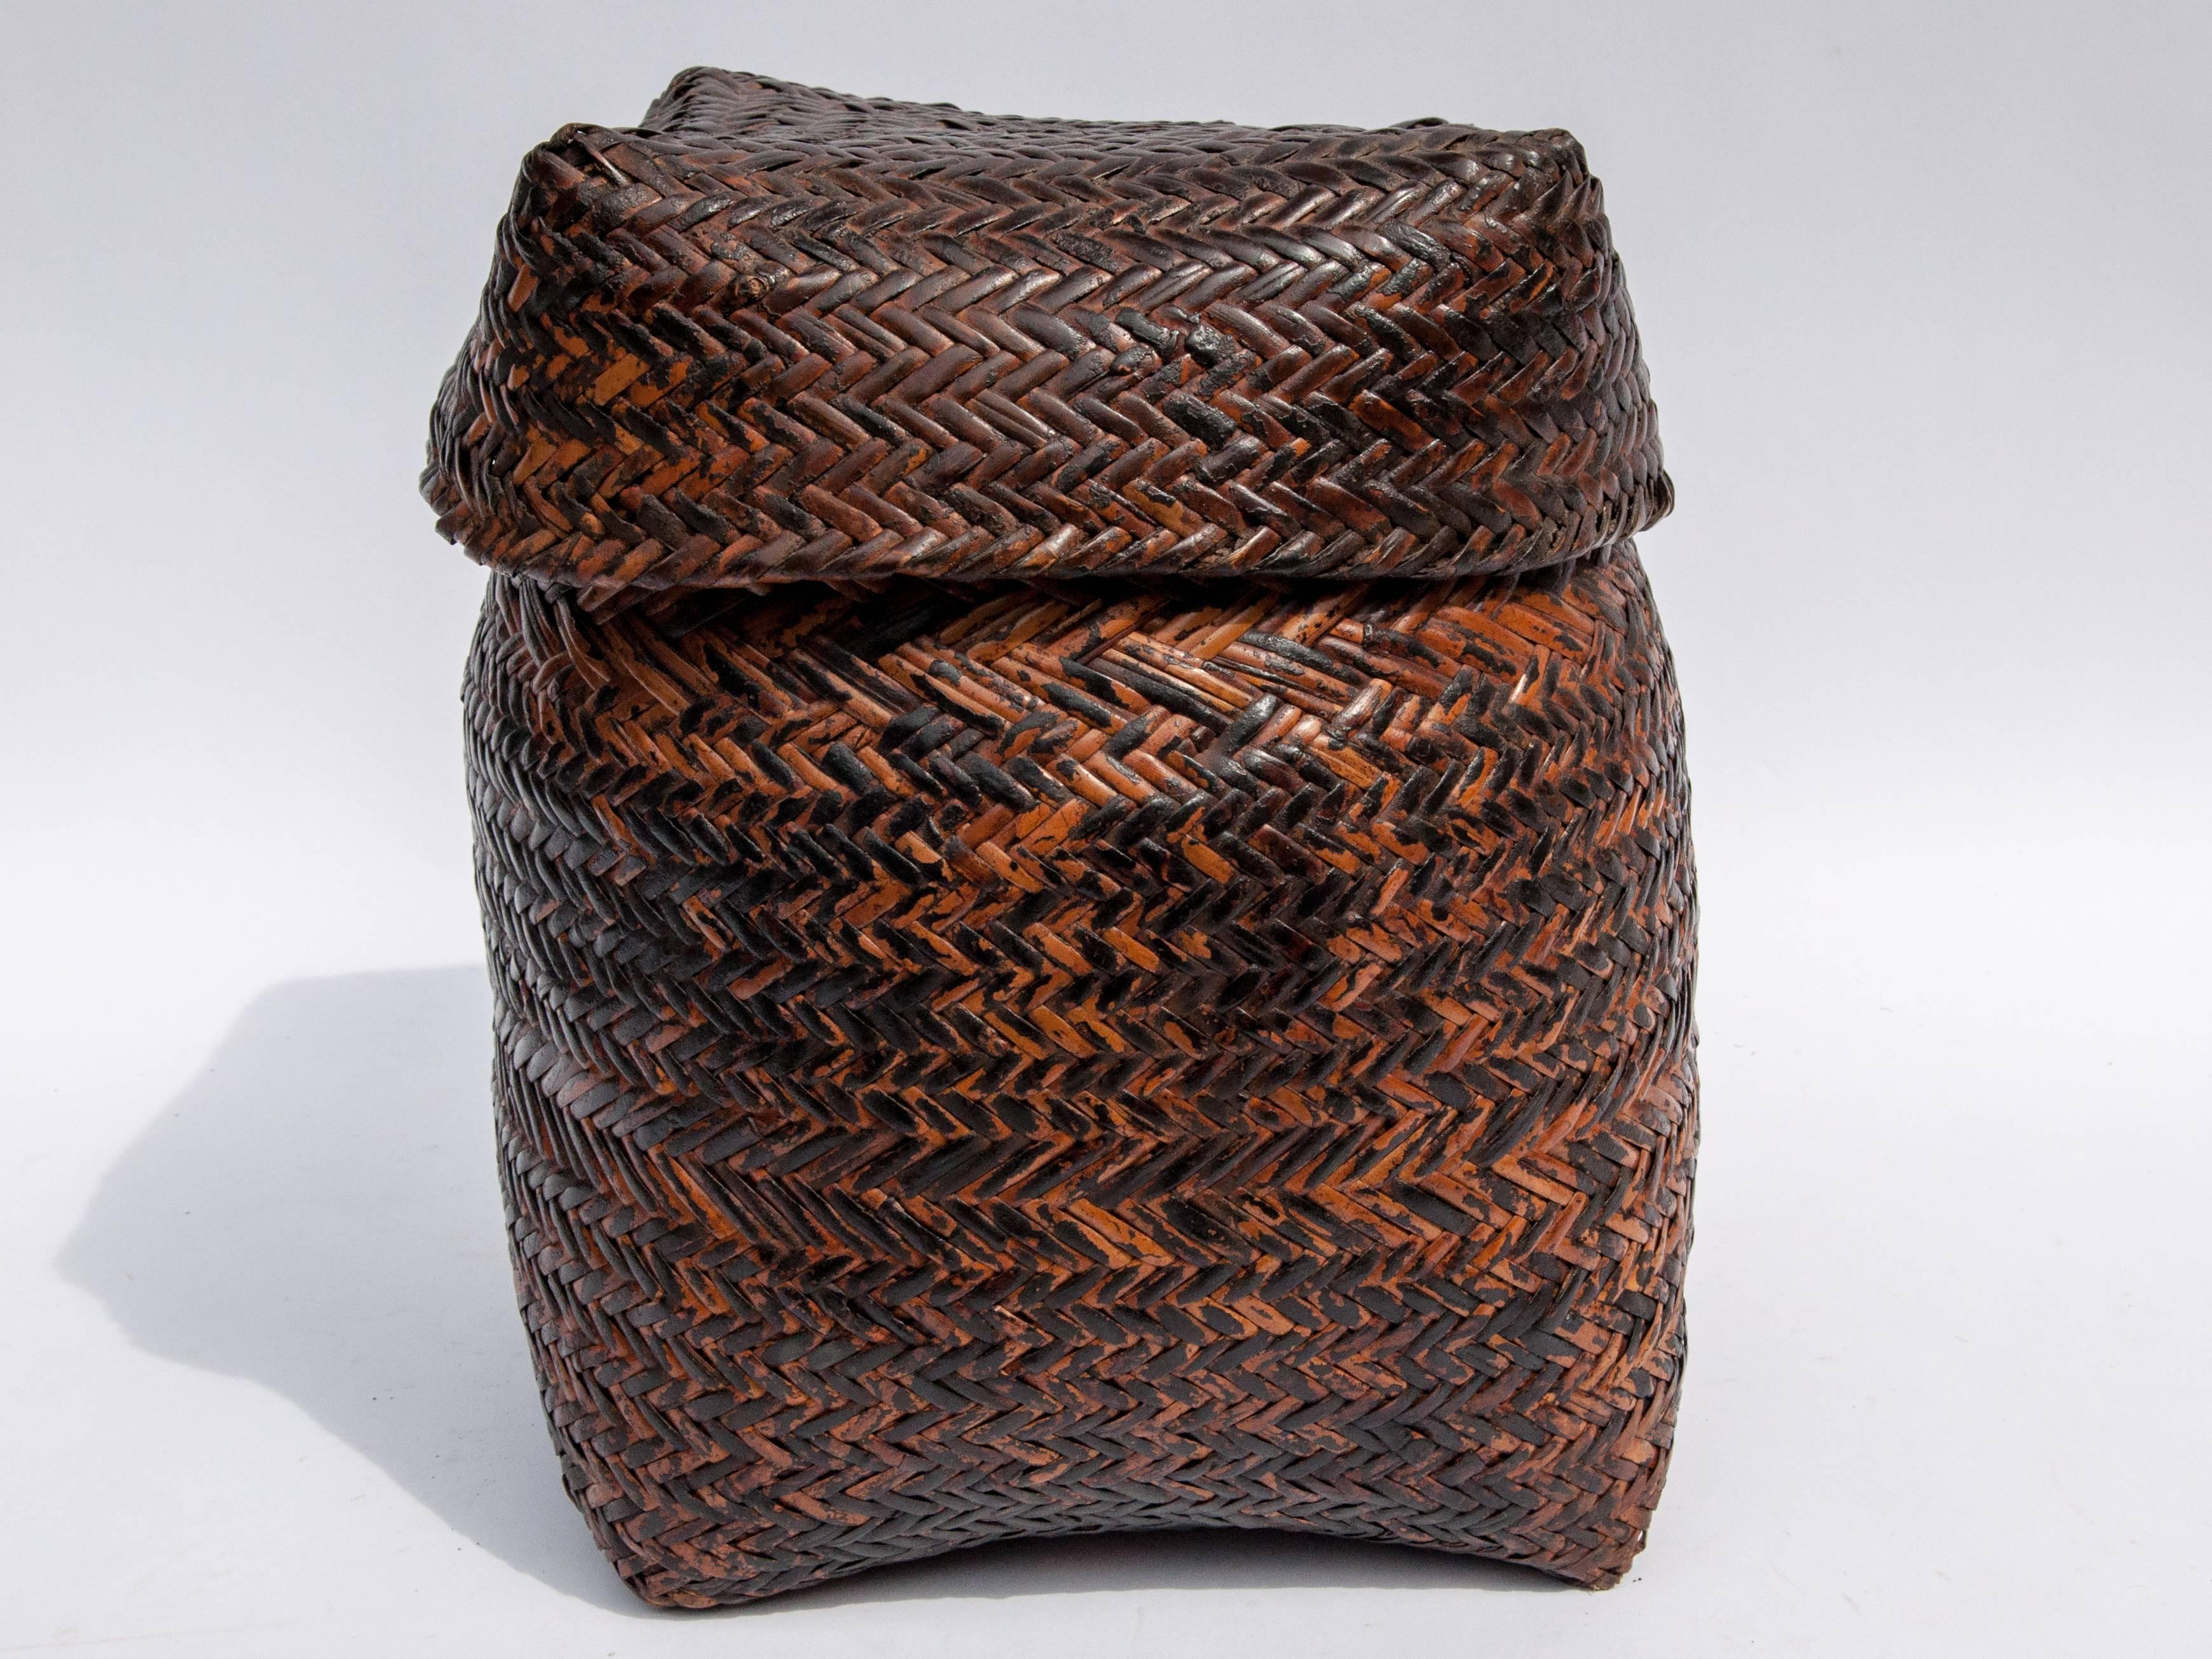 Bamboo Rustic Tribal Storage Basket with Lid from the Tamang of Nepal, Mid-20th Century